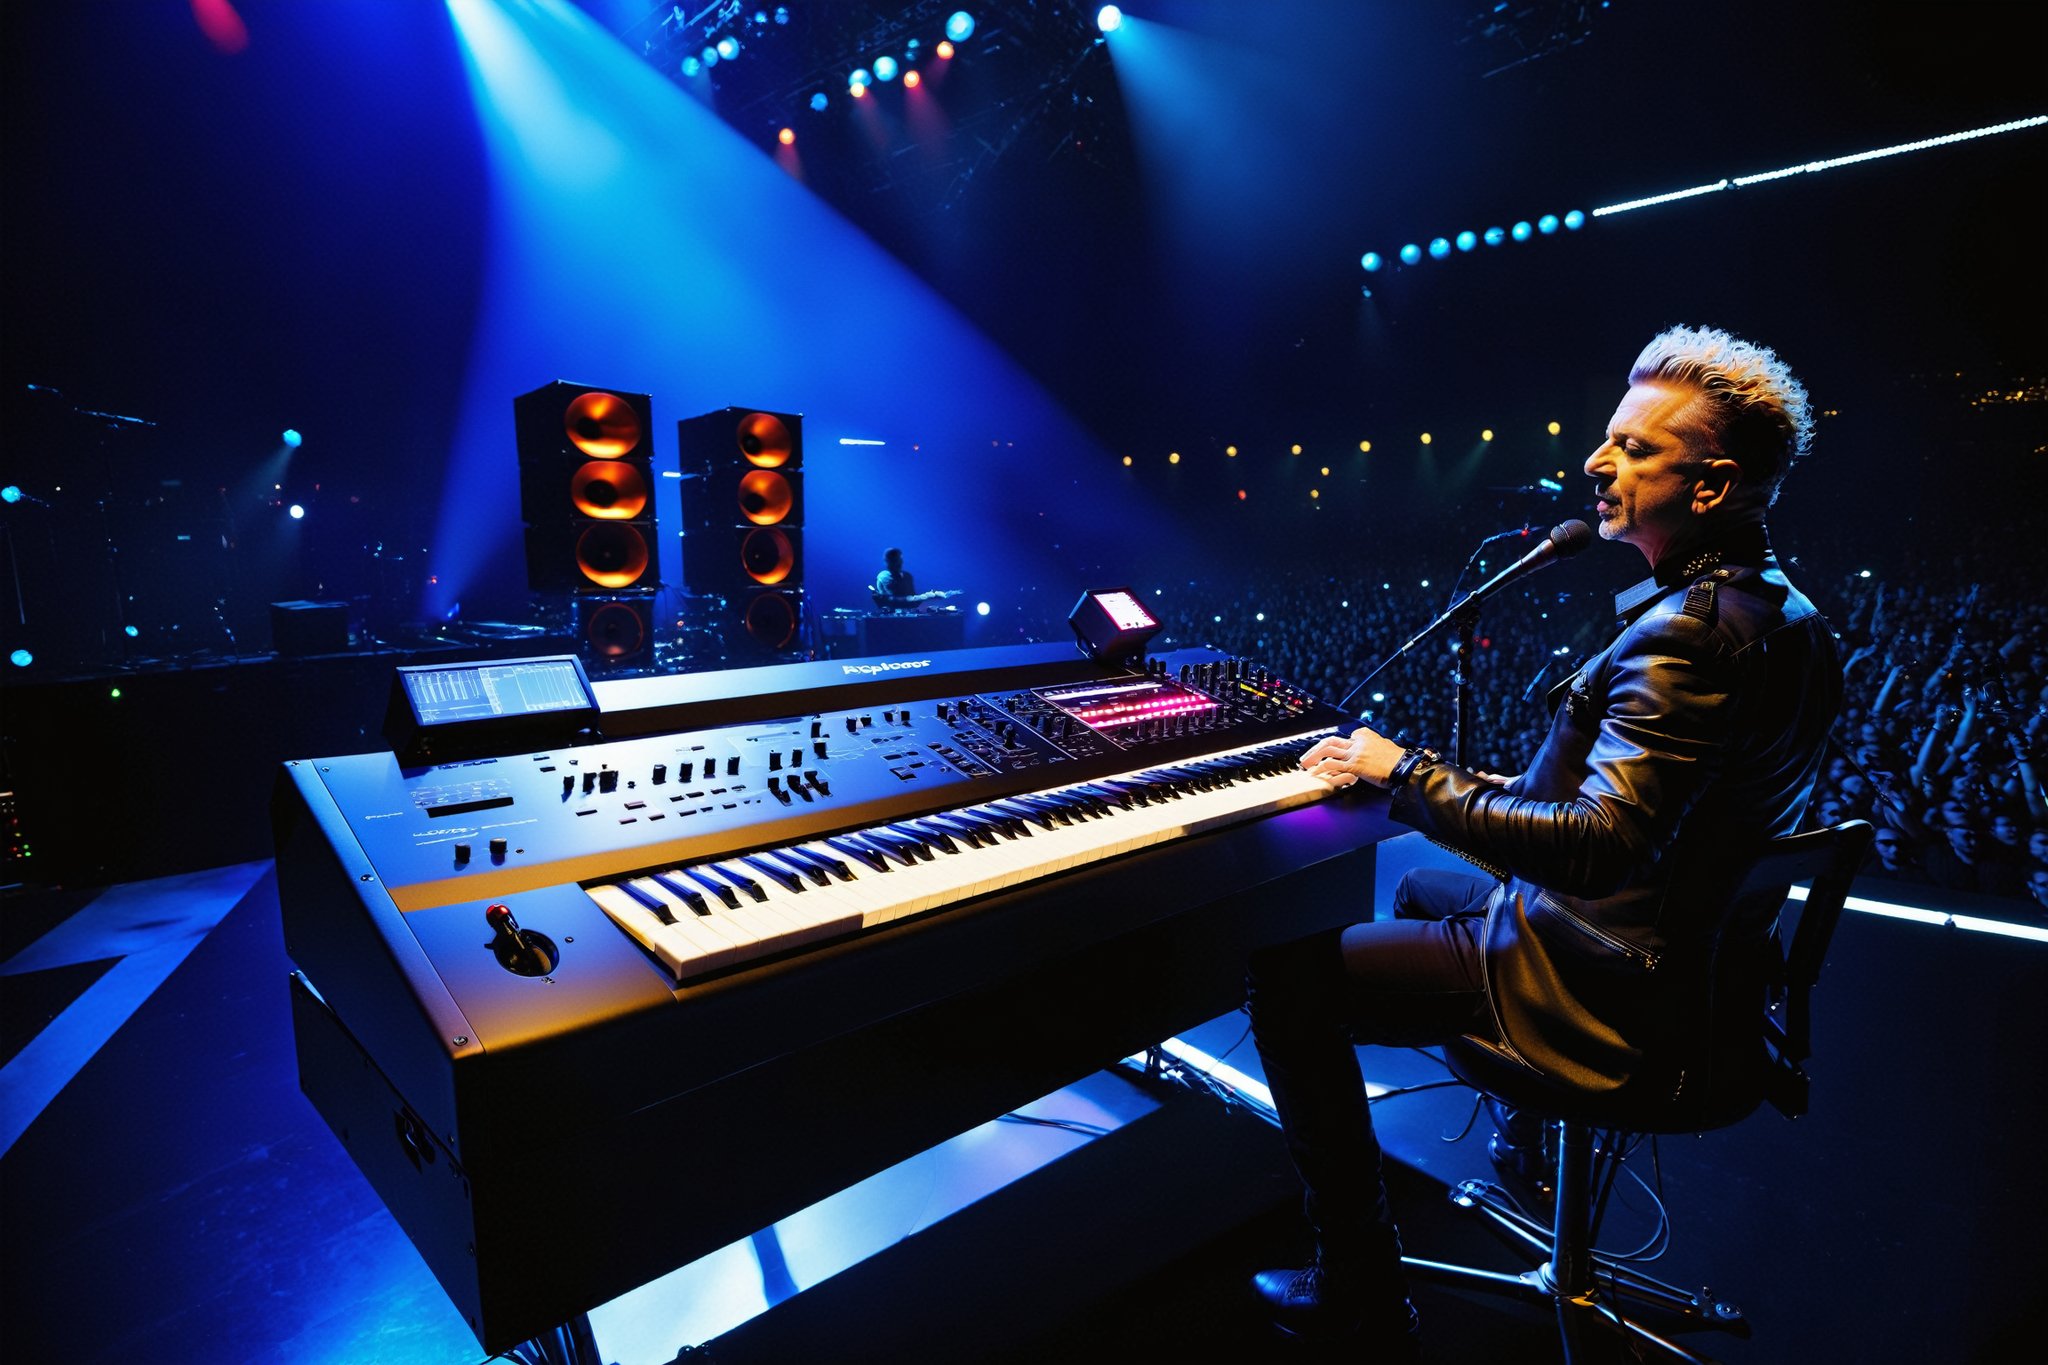 Andy Fletcher playing a photo-realistic, masterpiece, hyper-detailed photography of a 88 keys Roland 2023 concept synthesizer, monitor screens to display the plugins and visualize the music, Boeing 787 cockpit style screens distribution and controllers, ultra-realistic piano keyboard, recording studio atmosphere, best quality, 8k UHD, 8k, ultra quality, ultra detailed, LED lights, spectrum analyzers and sequencers, photo r3al, drone view, background of a Depeche Mode concert in Paris crowd, Dave Gahan singing, Martin Gore playing the electric guitar, and Vince Clarke plying the drums, laser rays on the scenario as part of the show,steampunk style